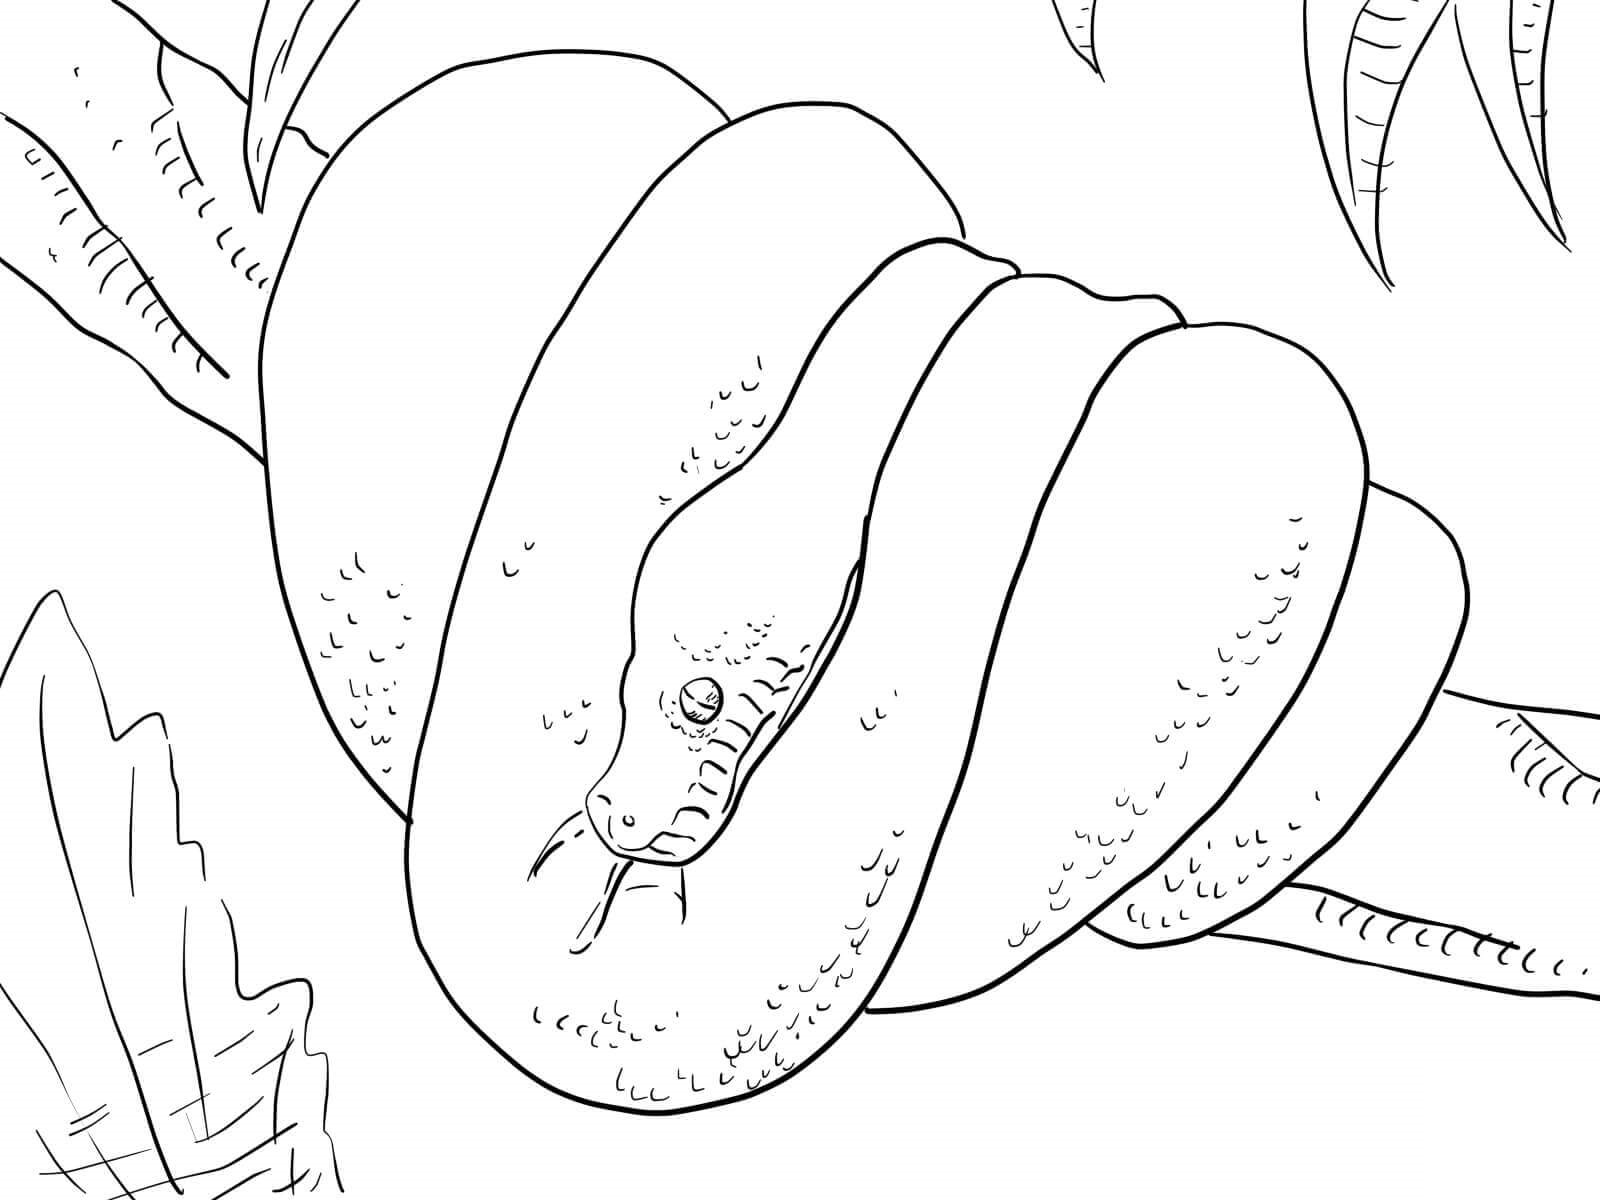 Big Python On The Tree Coloring Page Free Printable Coloring Pages For Kids